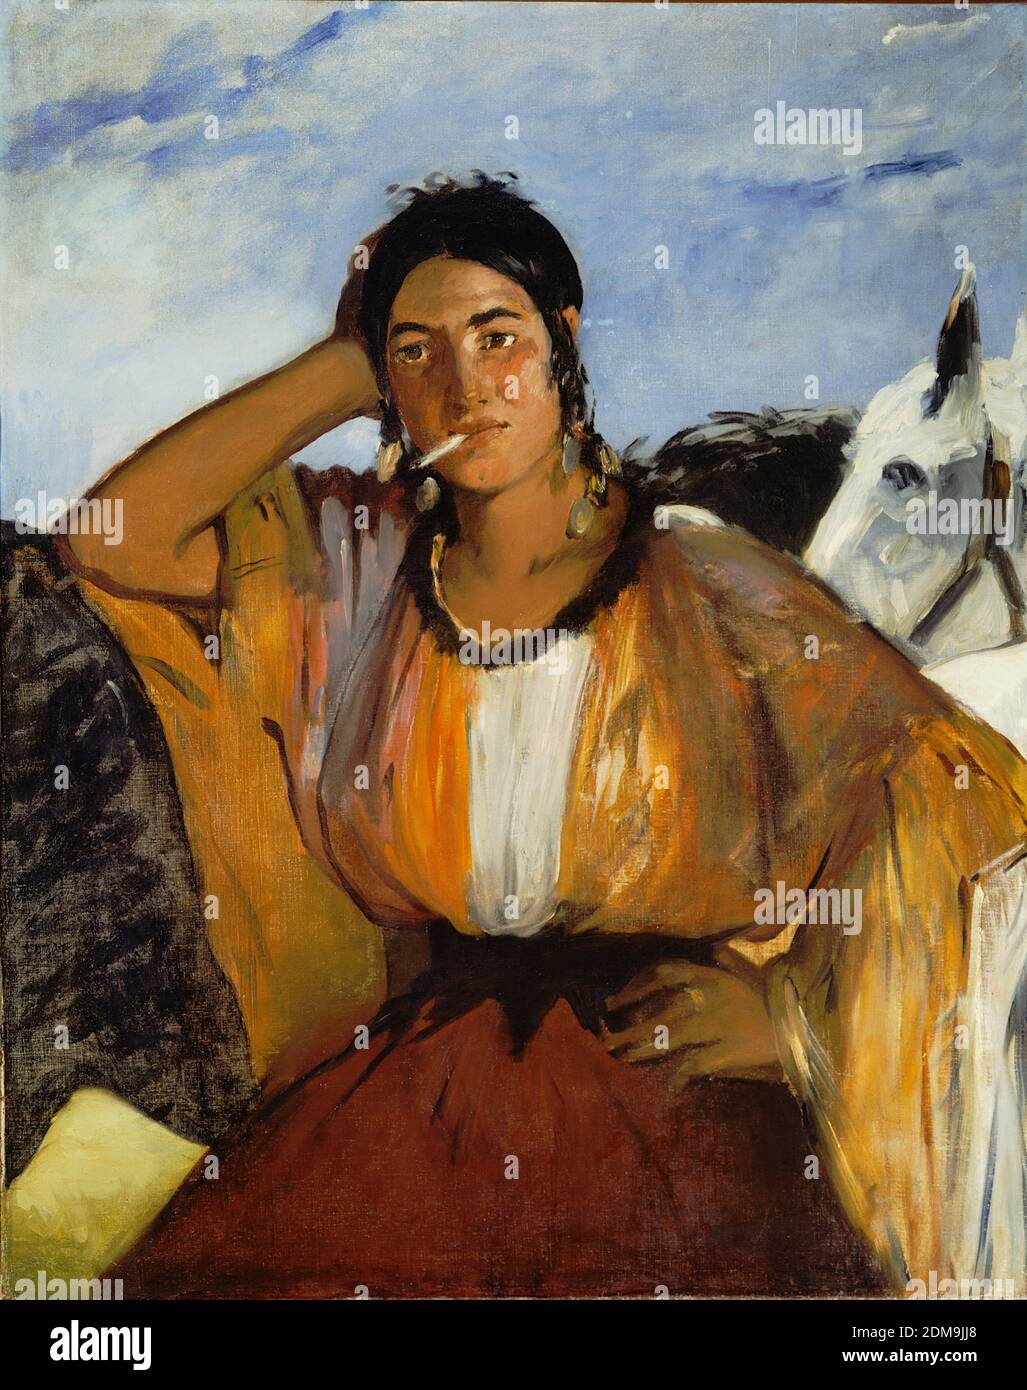 Gypsy with a Cigarette (1862) French modernist painting by Édouard Manet - Very high resolution and quality image Stock Photo